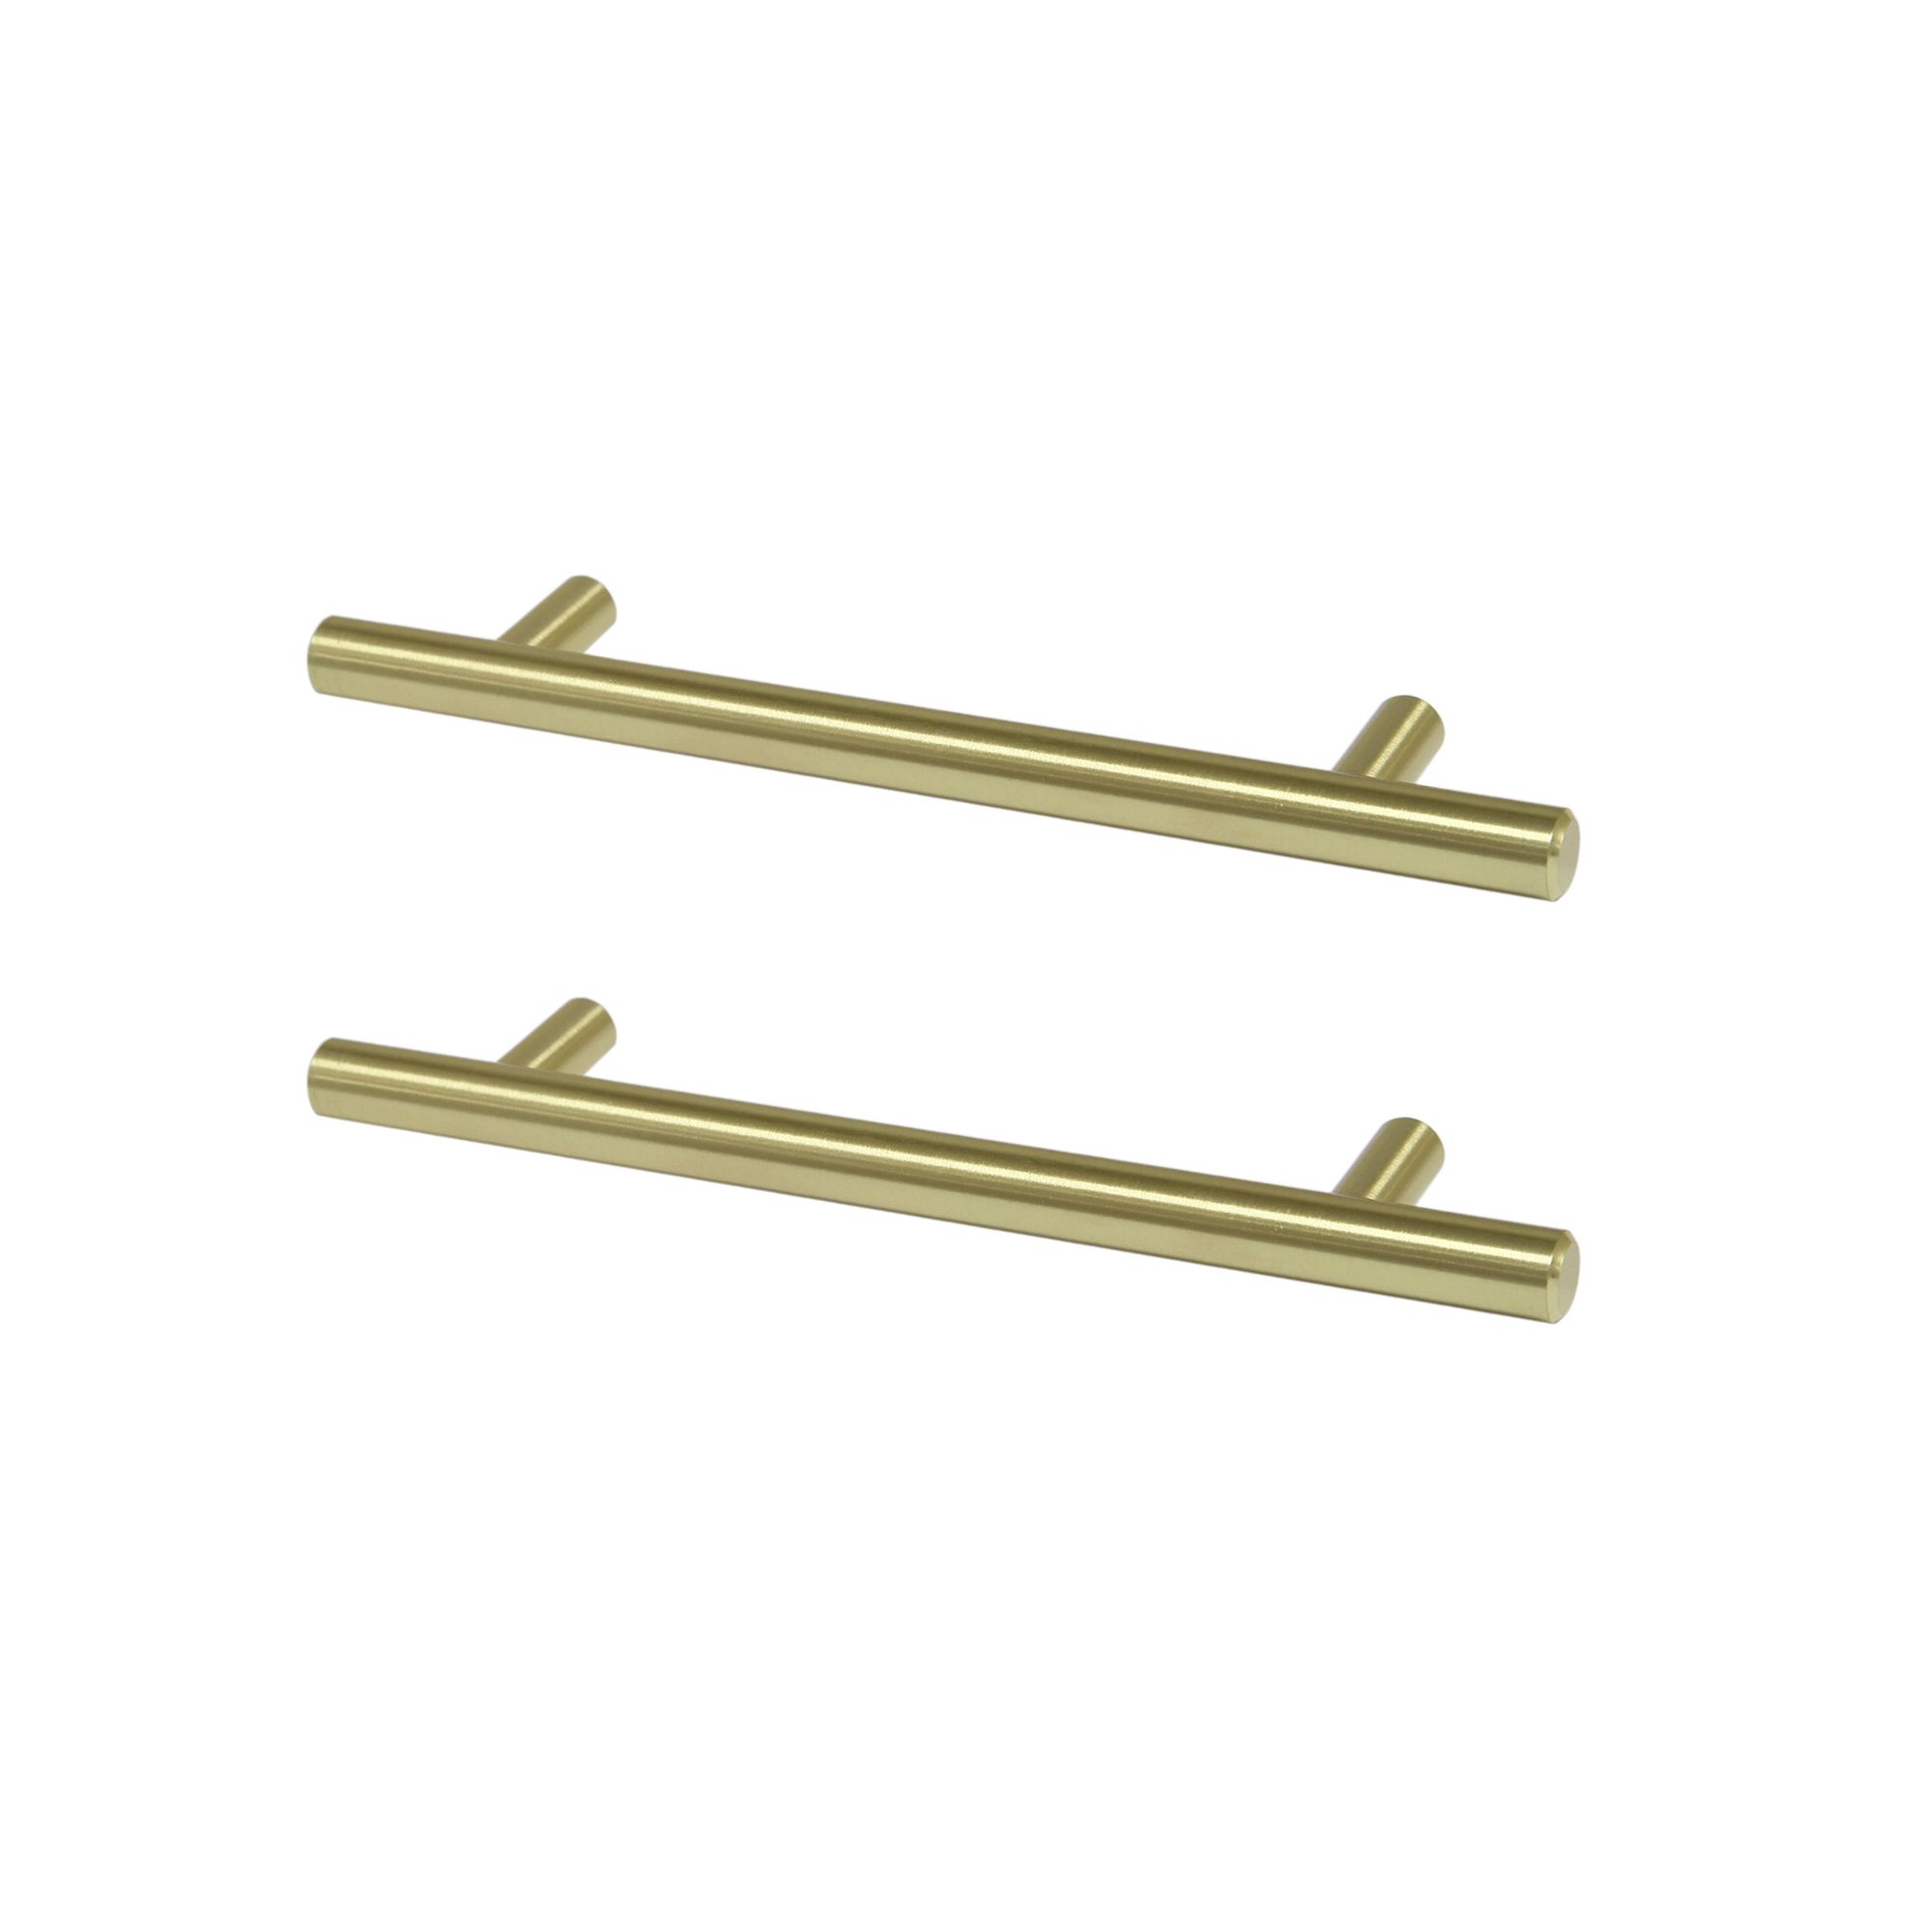 GoodHome Annatto Brass effect Kitchen cabinets Pull handle (L)18.8cm, Pack of 2